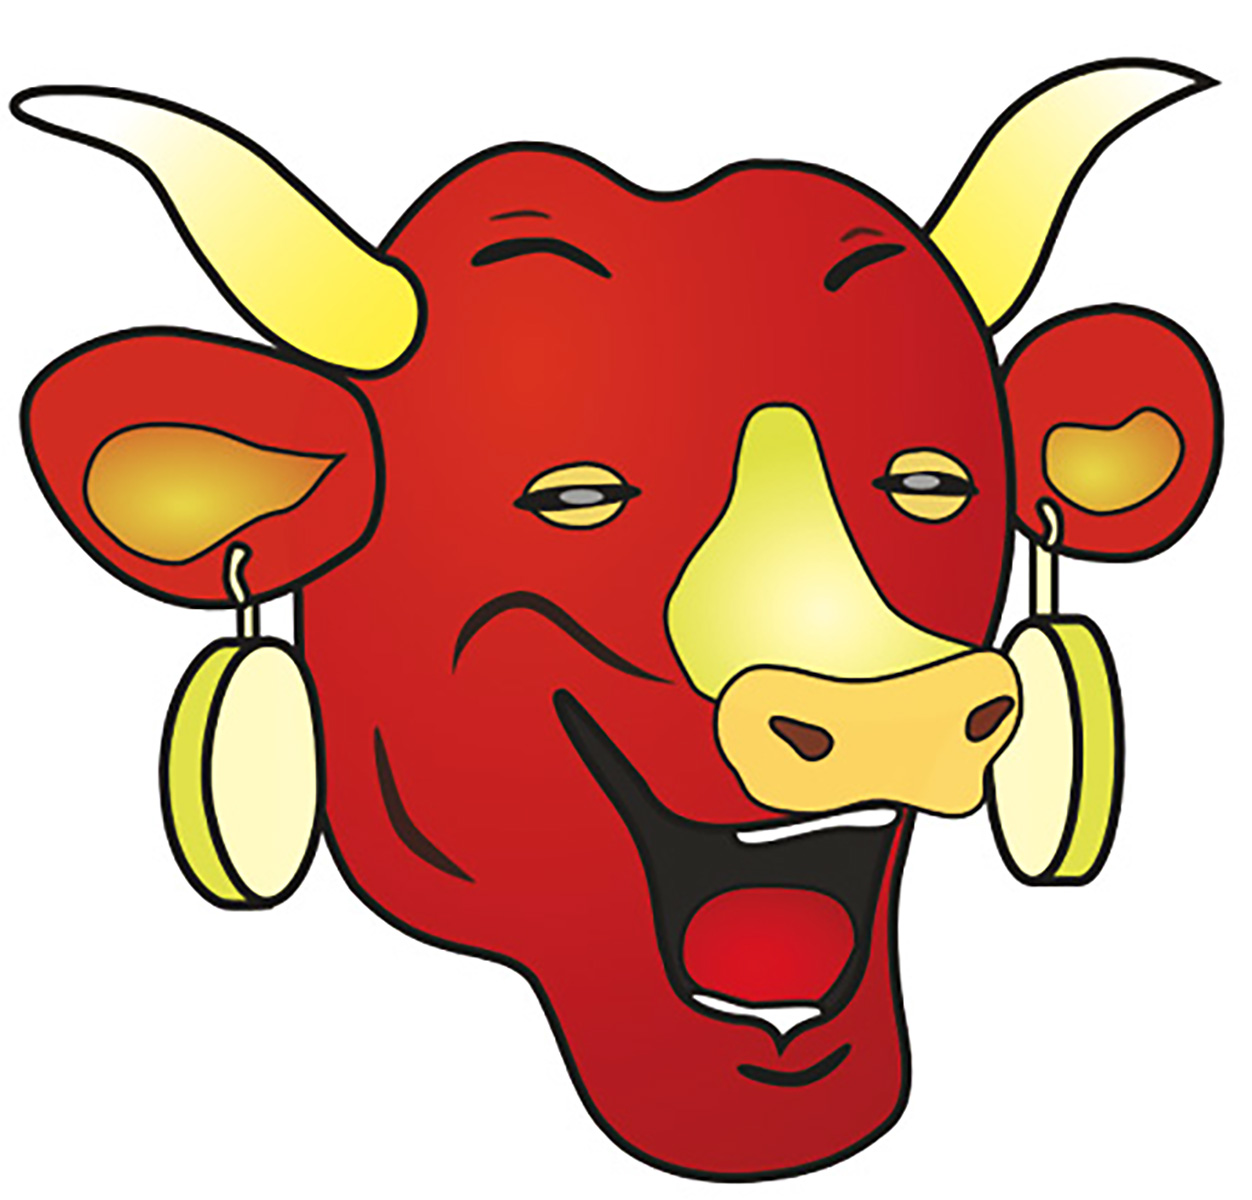 An illustration of a laughing cow’s face, the mascot of “La Vache Qui Rit,” the world’s first branded cheese launched in 1921.